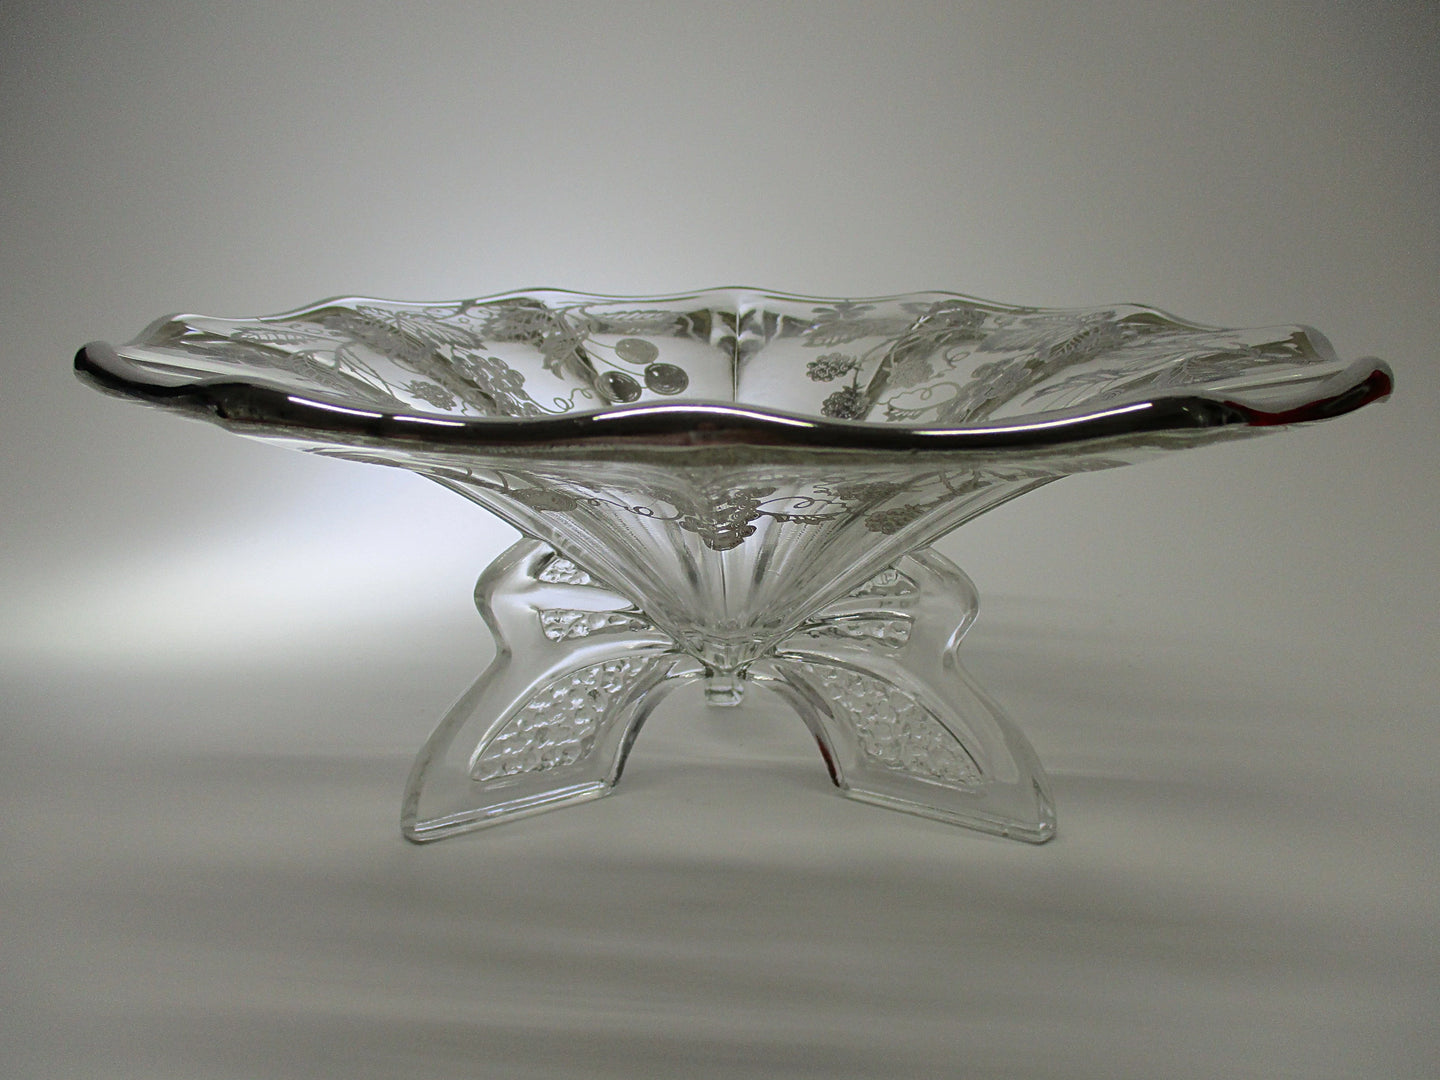 Silver City Berries Sterling Silver Overlay Butterfly Footed Bowl.